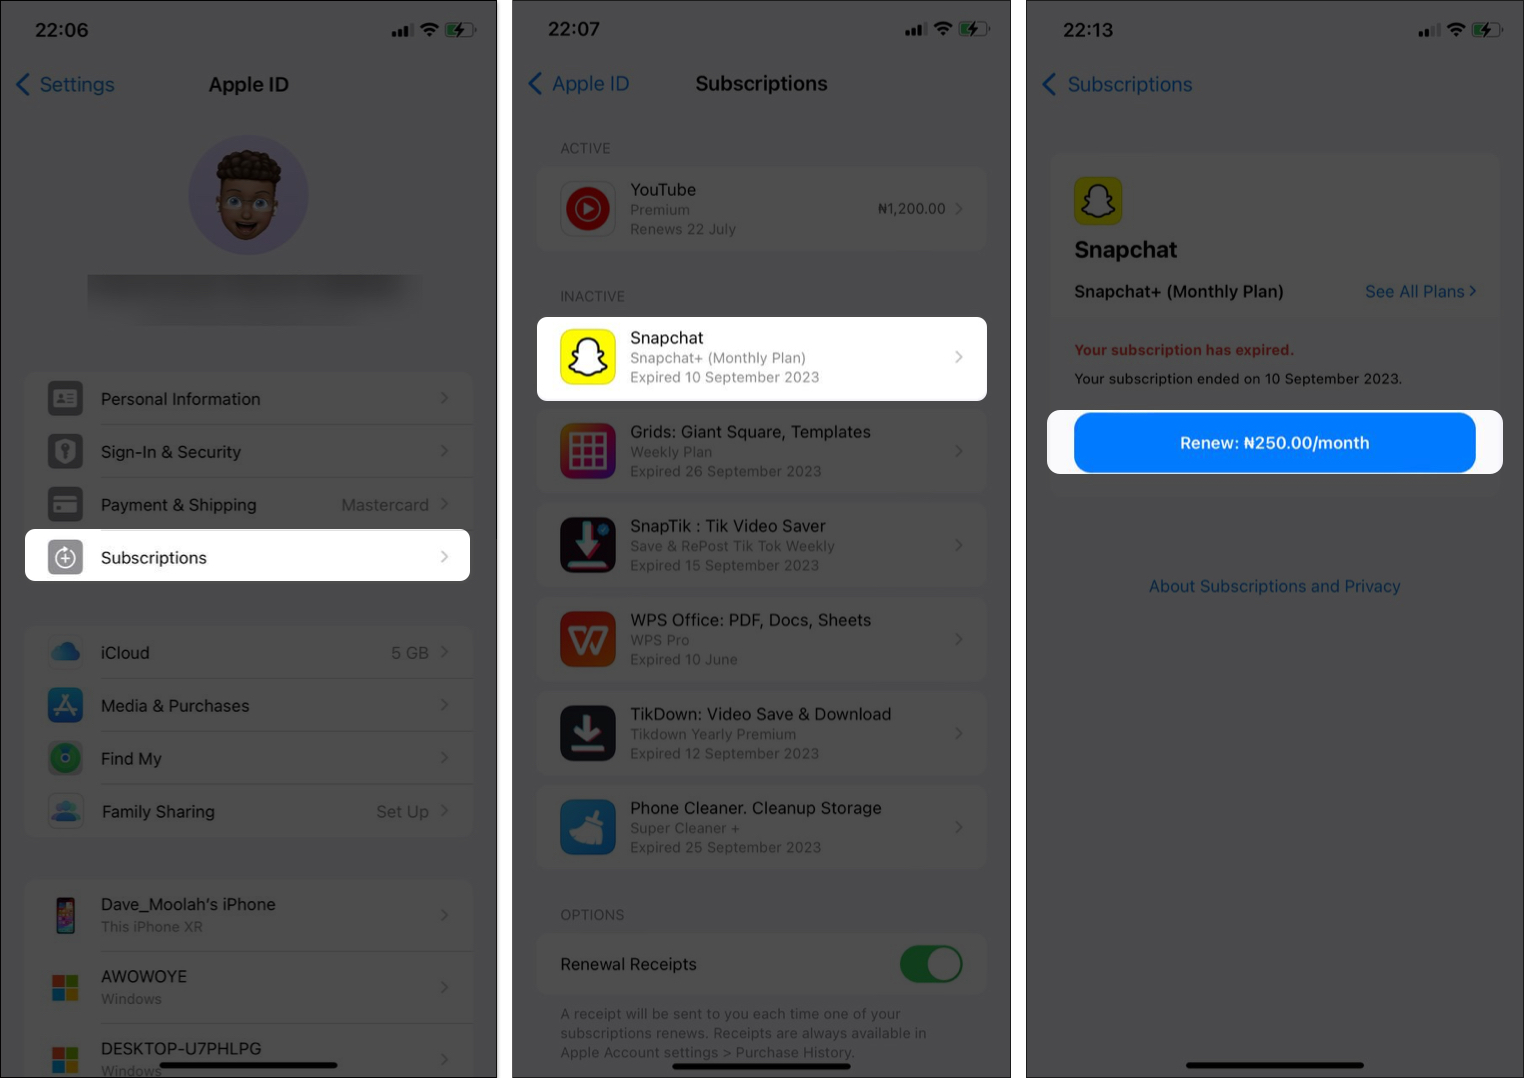 Renew option for Snapchat subscription on iPhone Settings app.